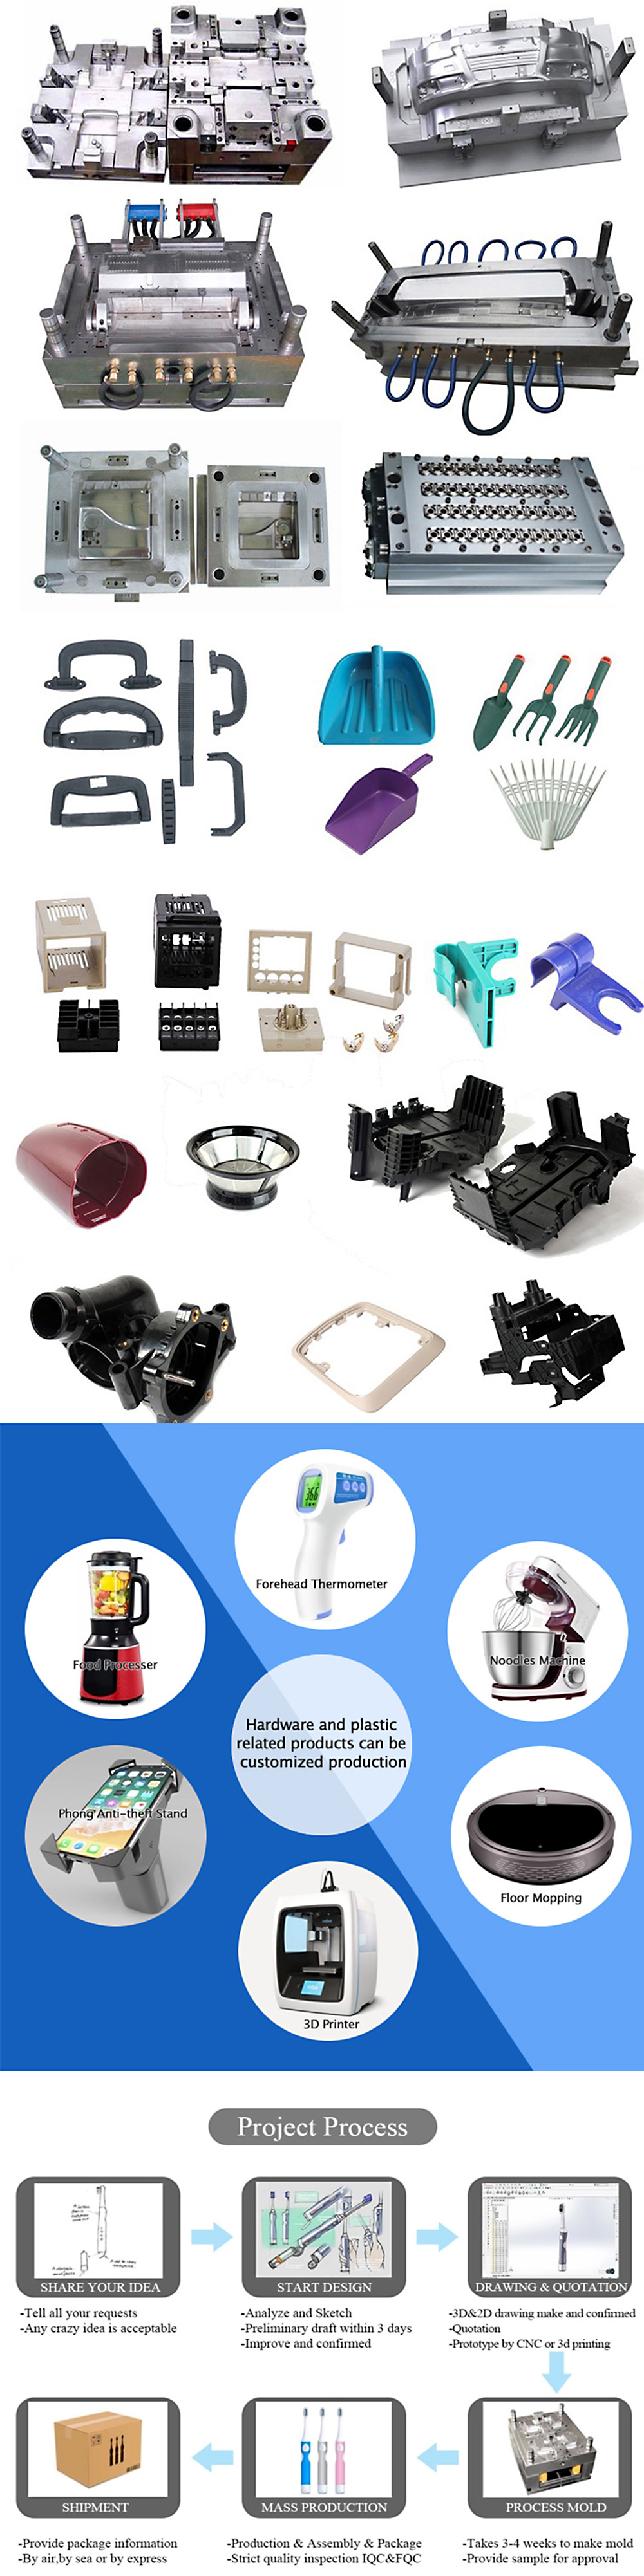 Processing Plastic injection mold | Processing Injection molding parts | custom Plastic injection